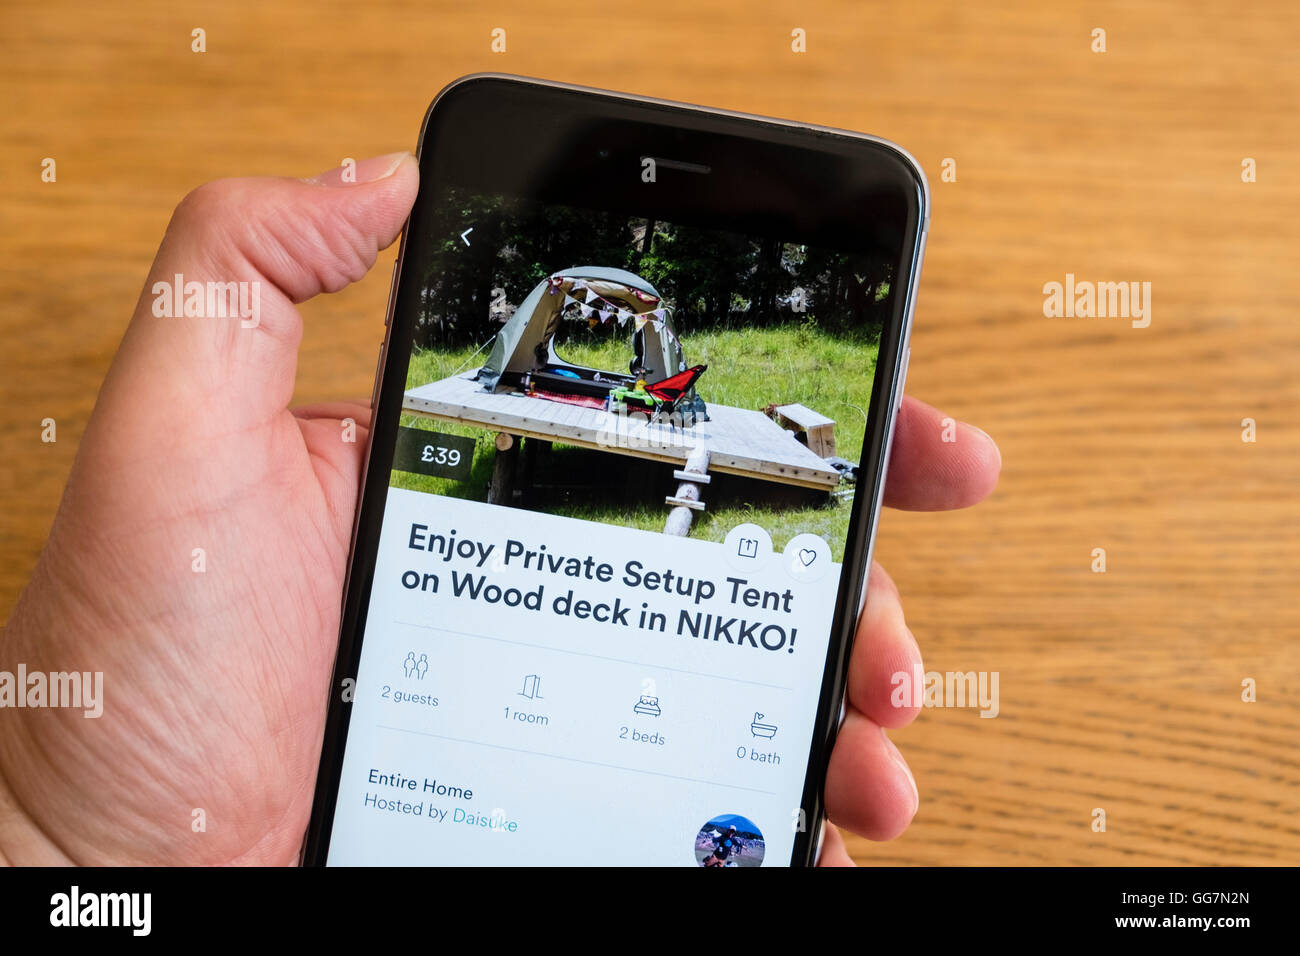 Airbnb app showing tent for rent in Japan Stock Photo